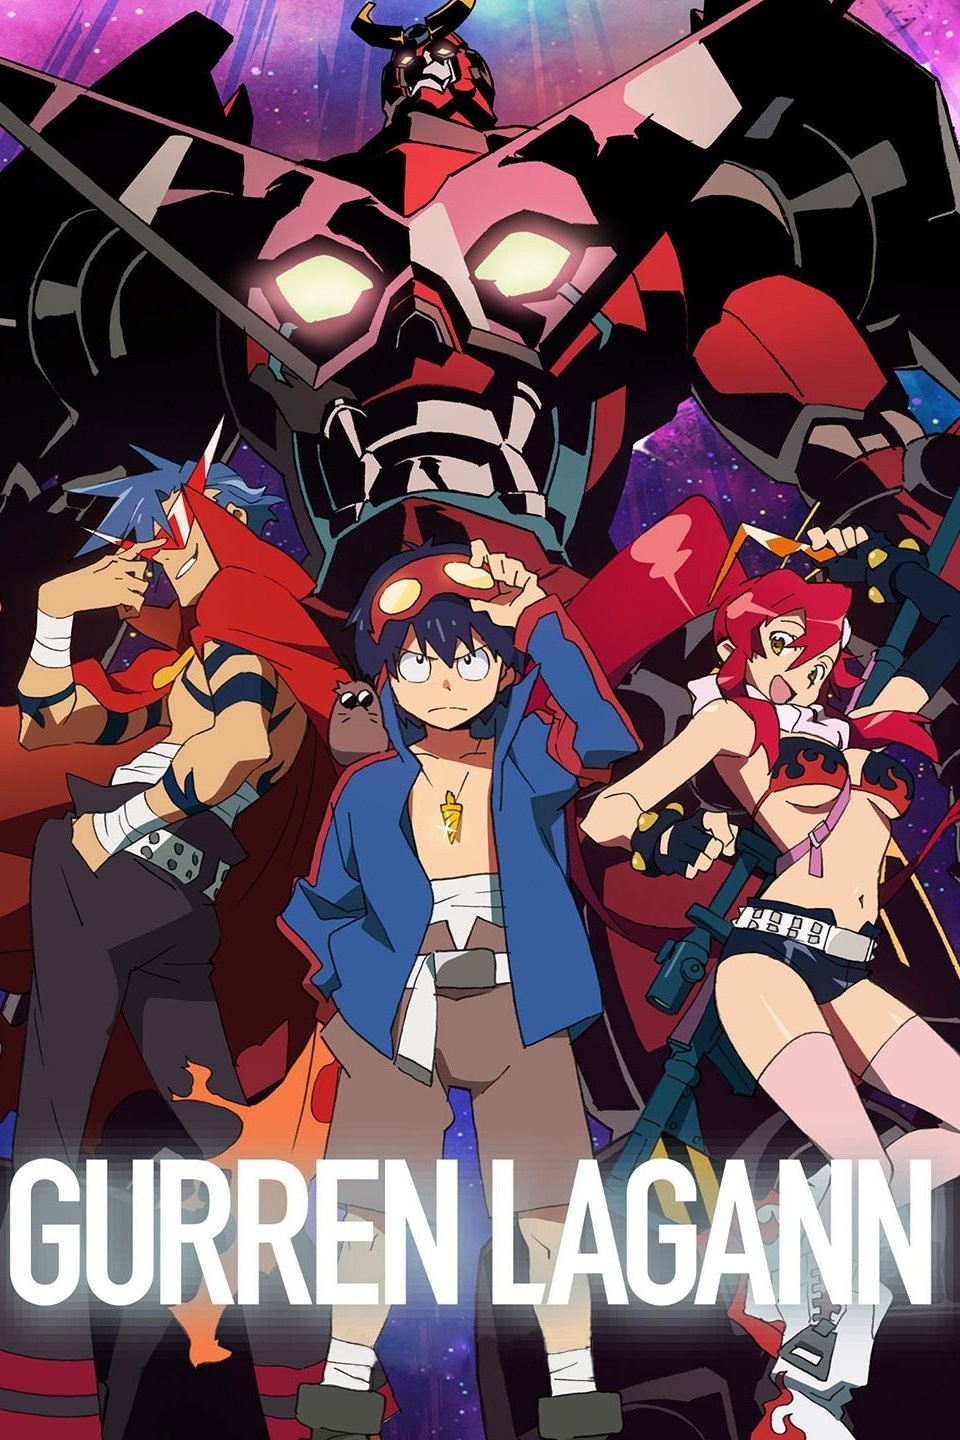 JUST IN: Gurren Lagann the Movie - New Trailer & Visual! Follow  @animecorner_ac for more! Watch & read details on our website or via…